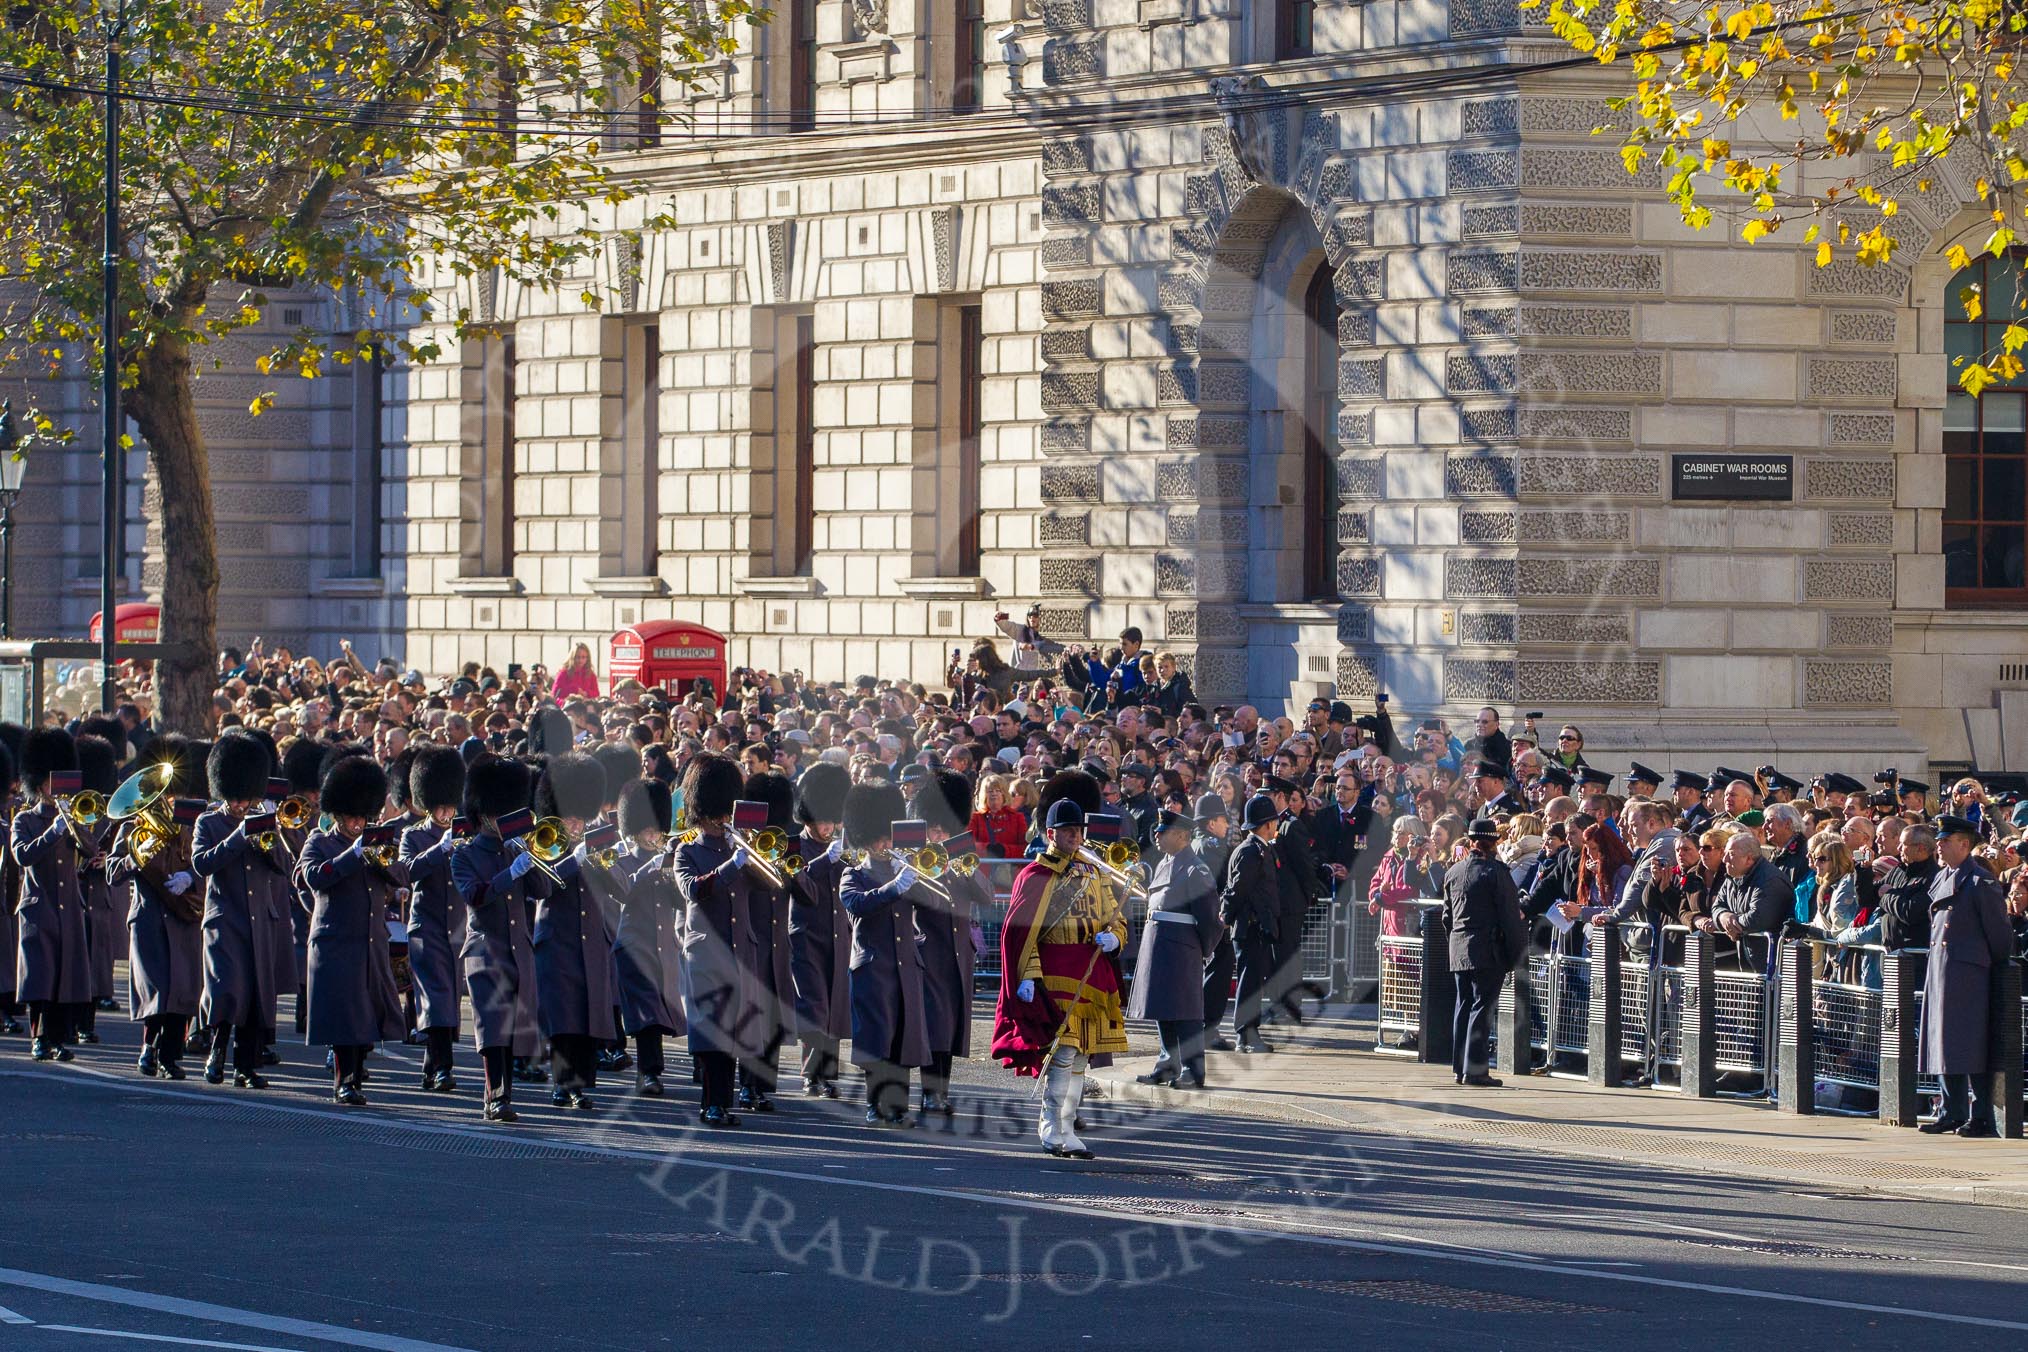 The Massed Bands of the Guards Divisions marching towards the Cenotaph from the west, lead by Drum Major Tony Taylor, No. 7 Company Coldstream Guards.